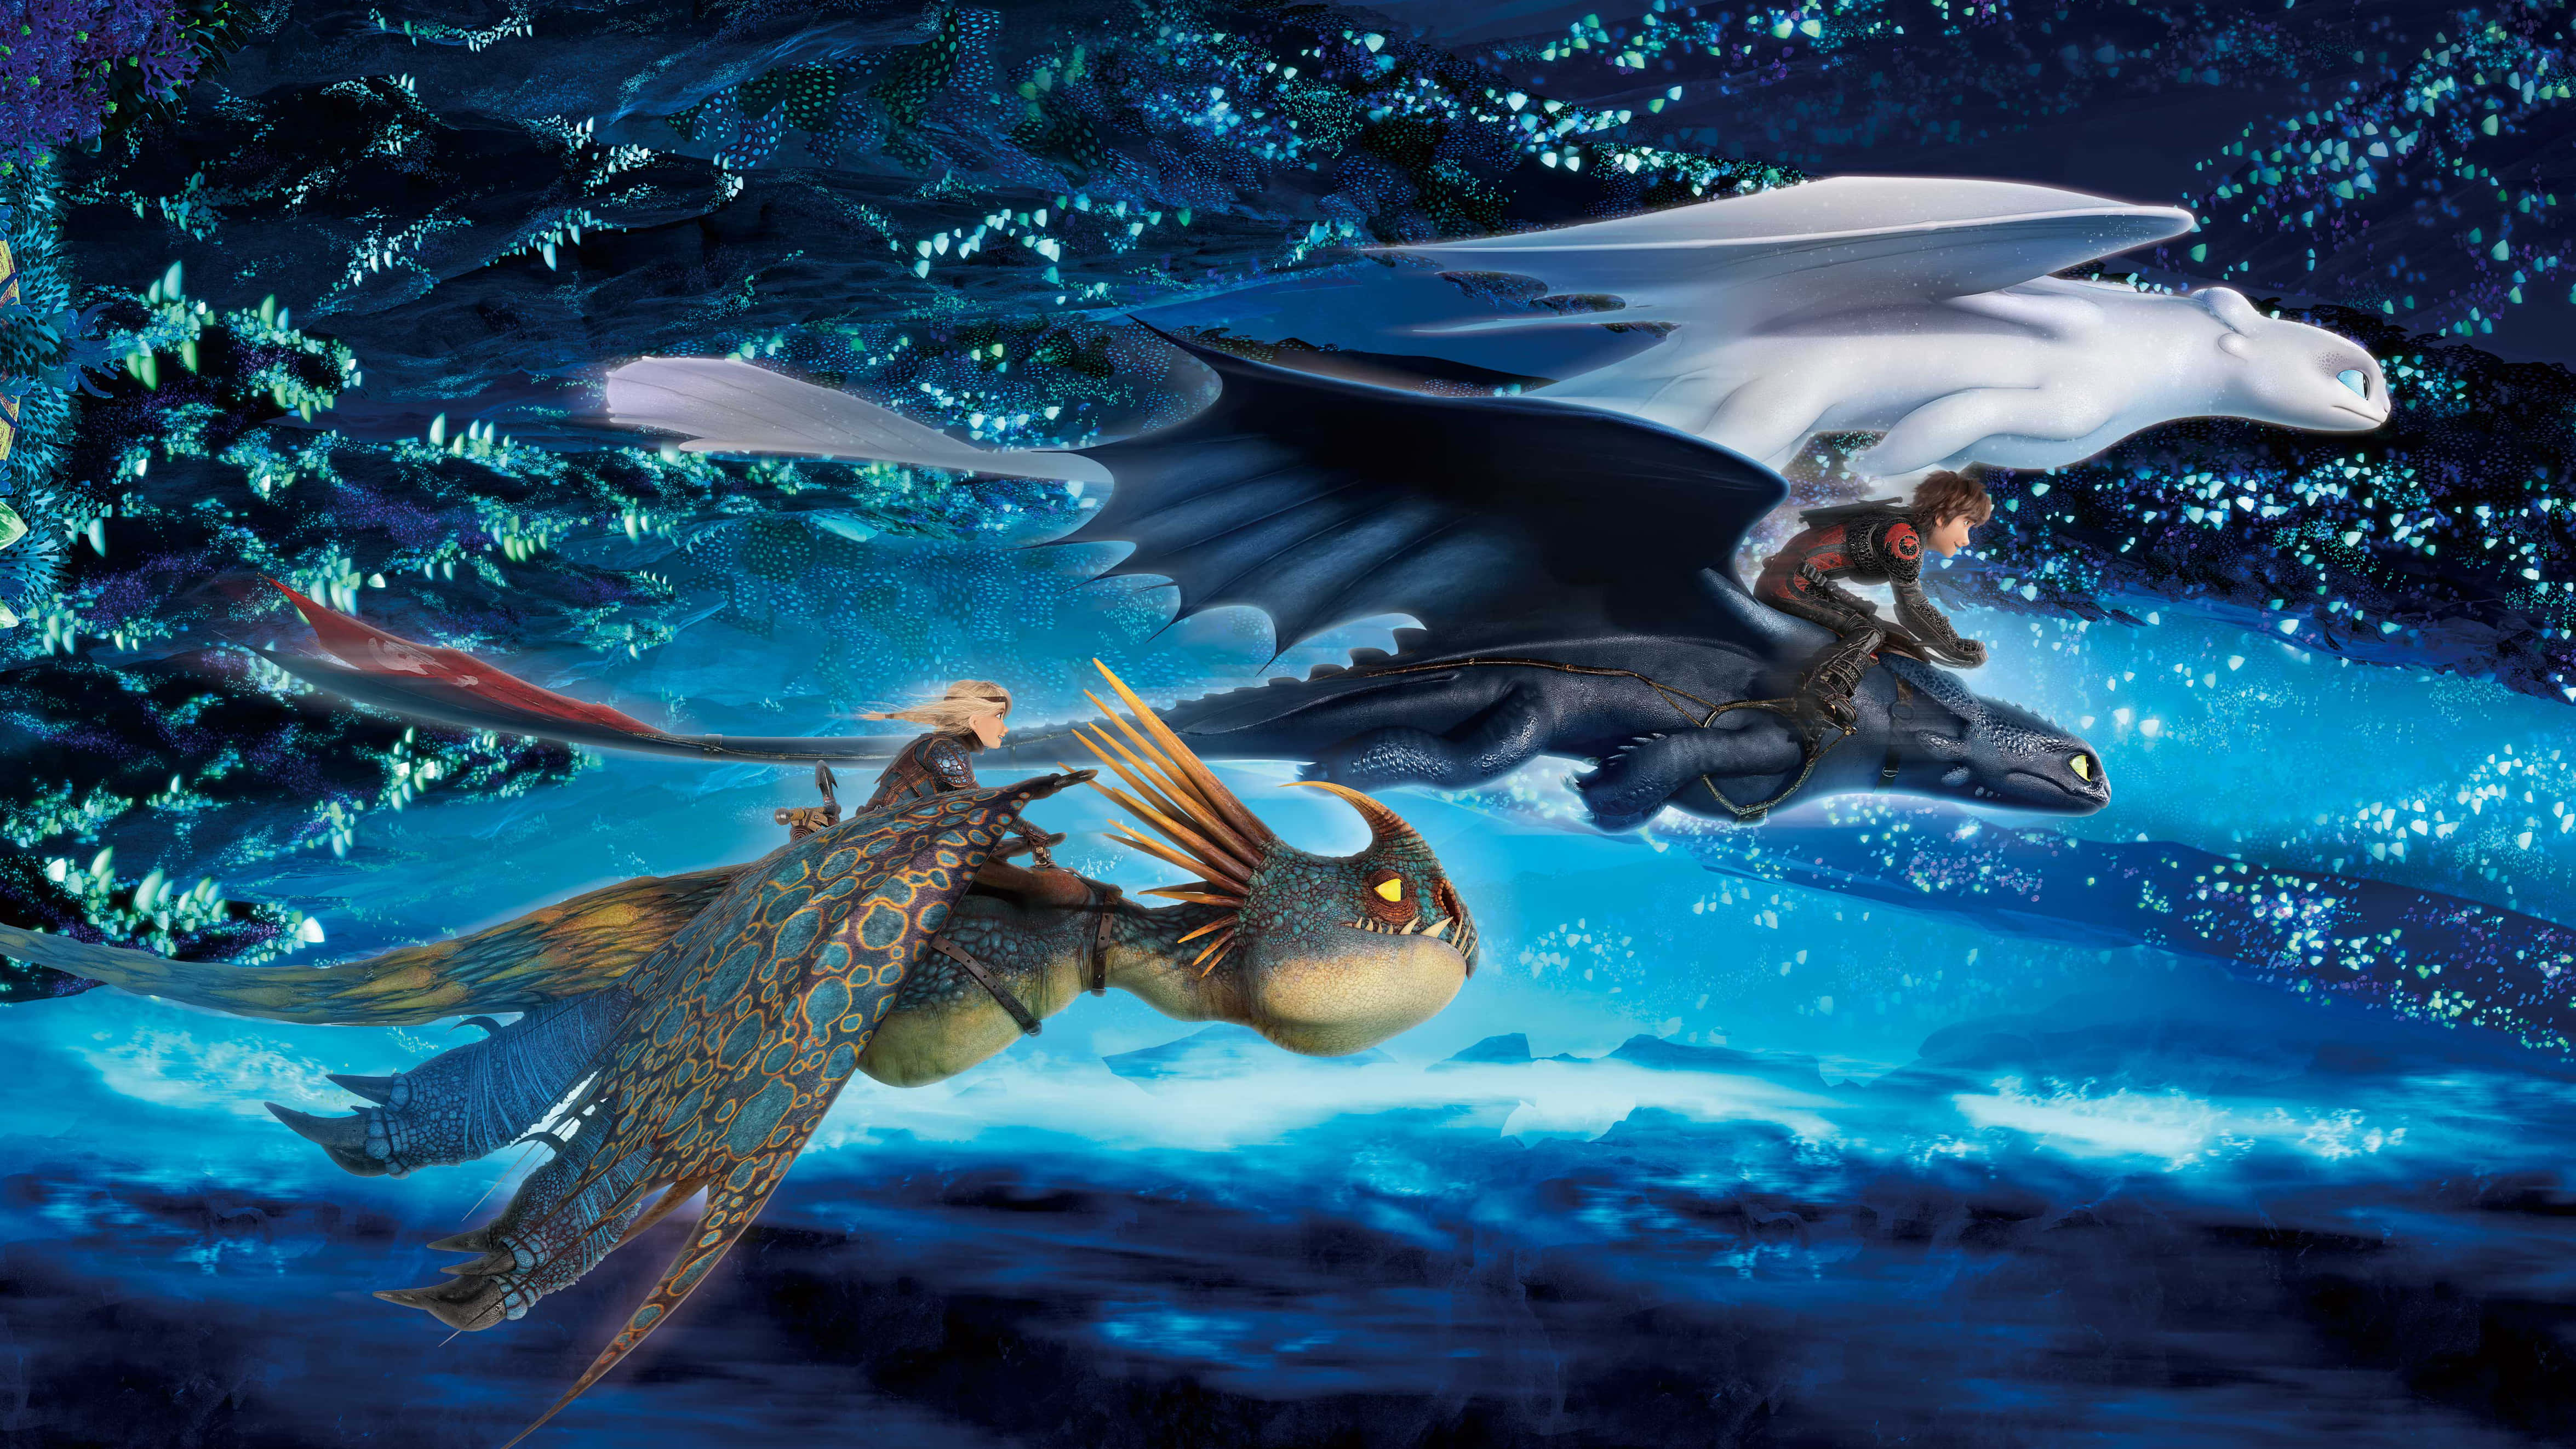 Hiccup and Toothless fly together over the land in How To Train Your Dragon Wallpaper